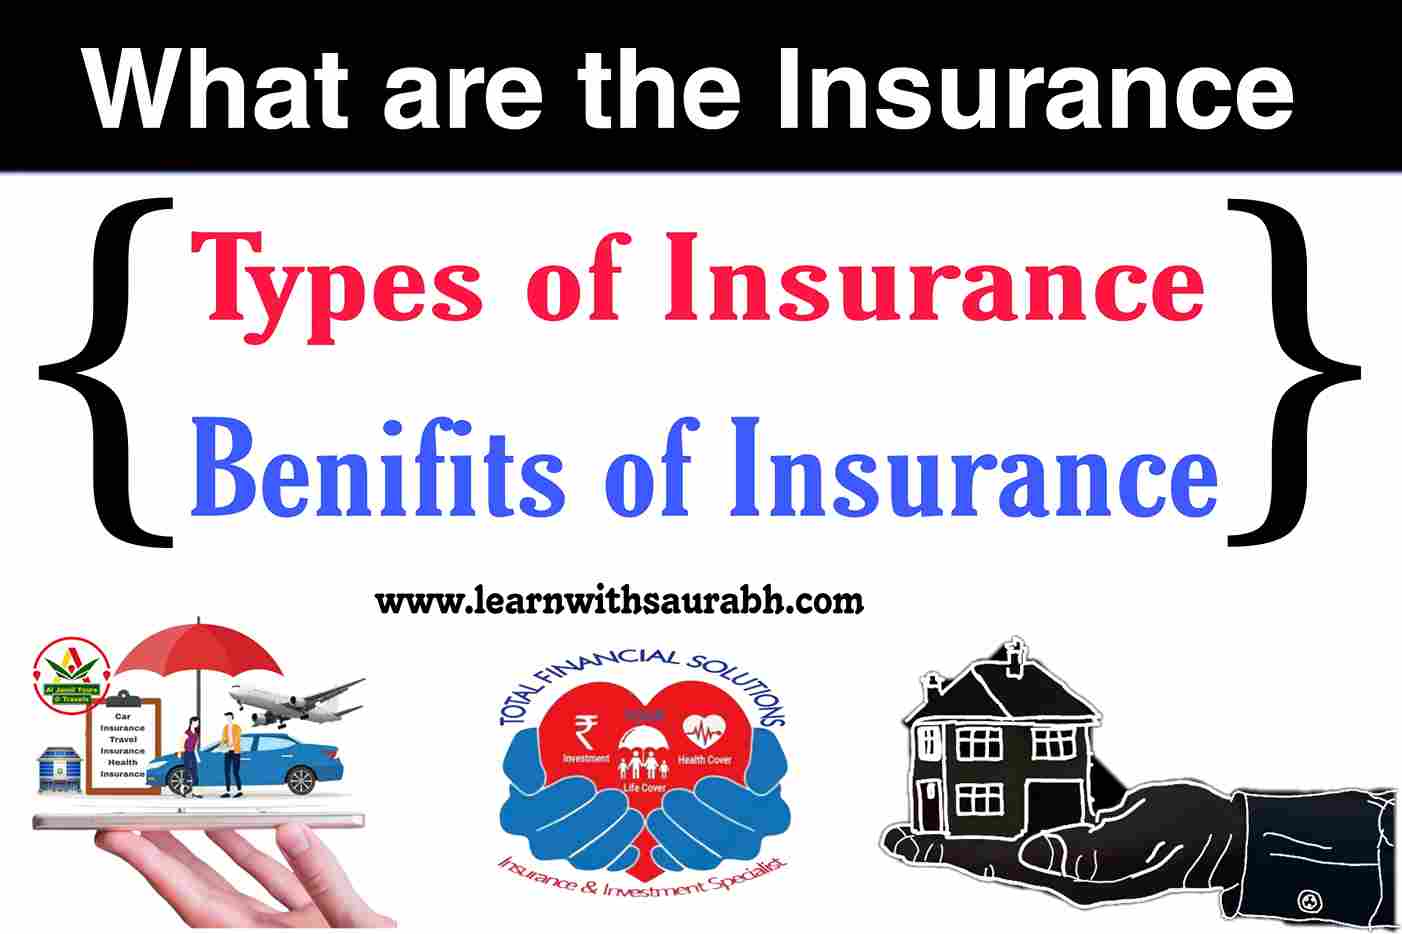 What are the types of Insurance and Benefits of Insurance in India?